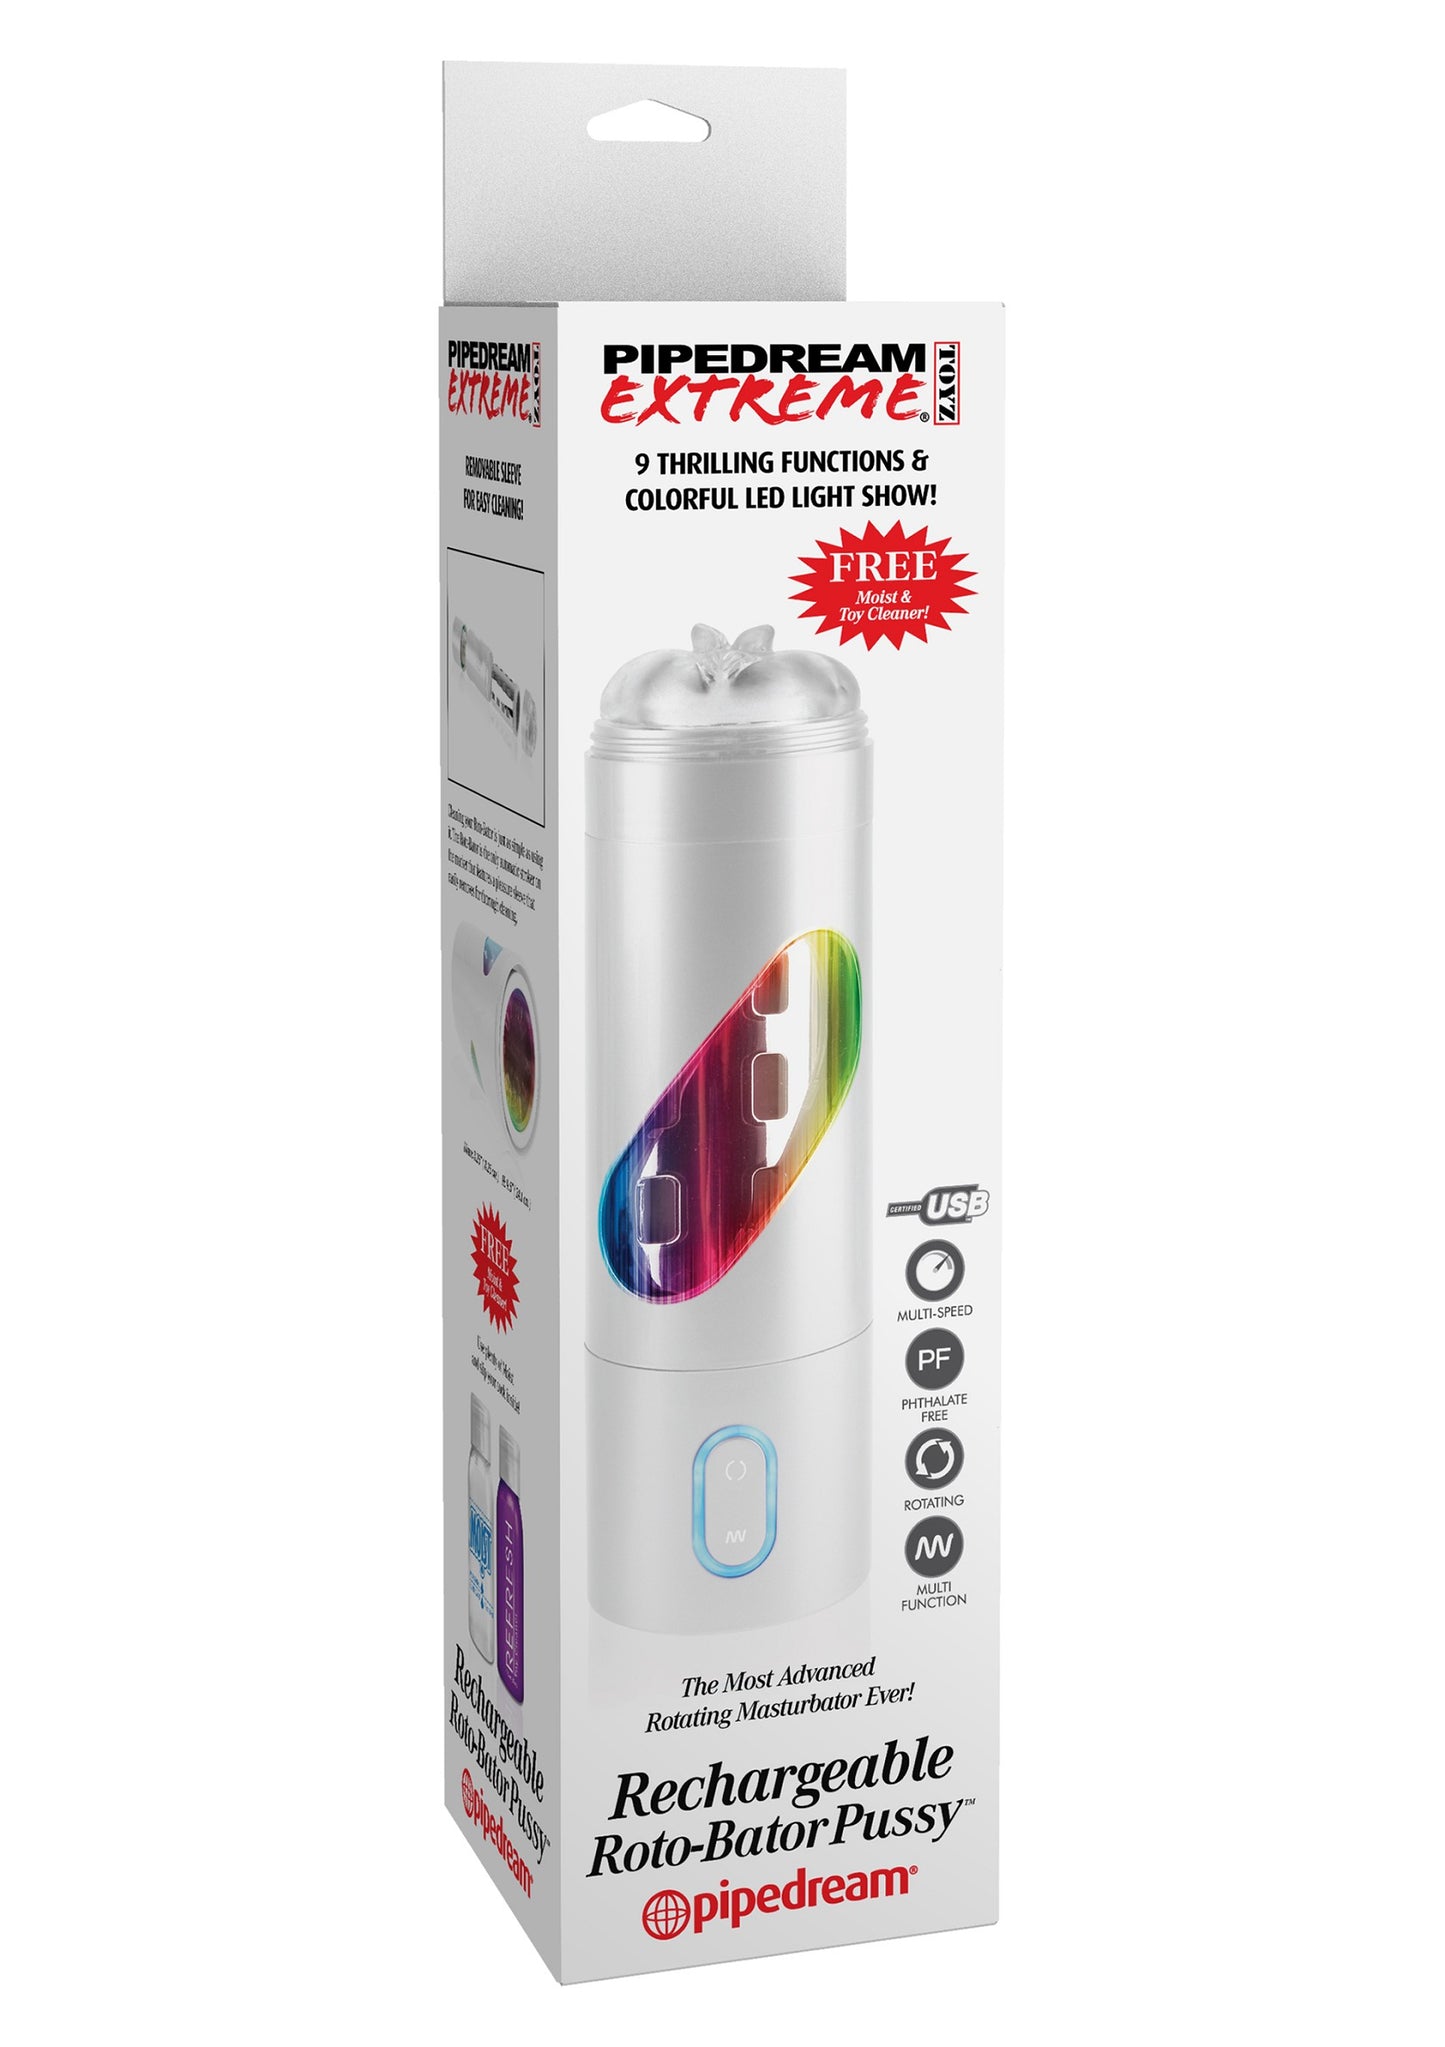 Pipedream PDX Extreme Rechargeable Roto-Bator Pussy SKIN - 1